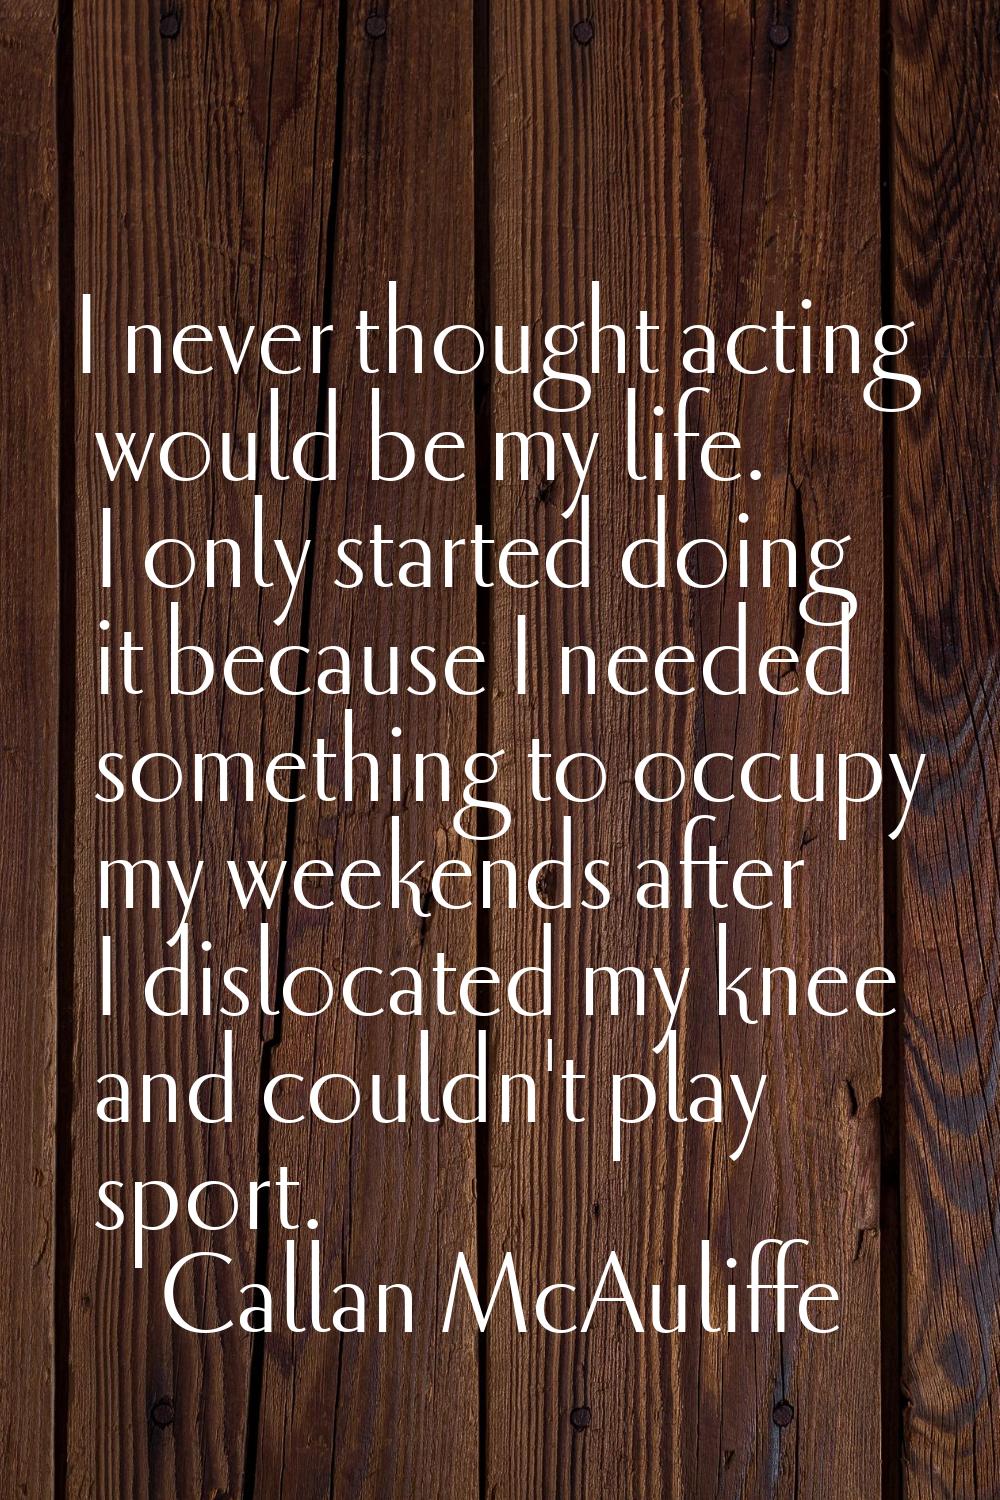 I never thought acting would be my life. I only started doing it because I needed something to occu